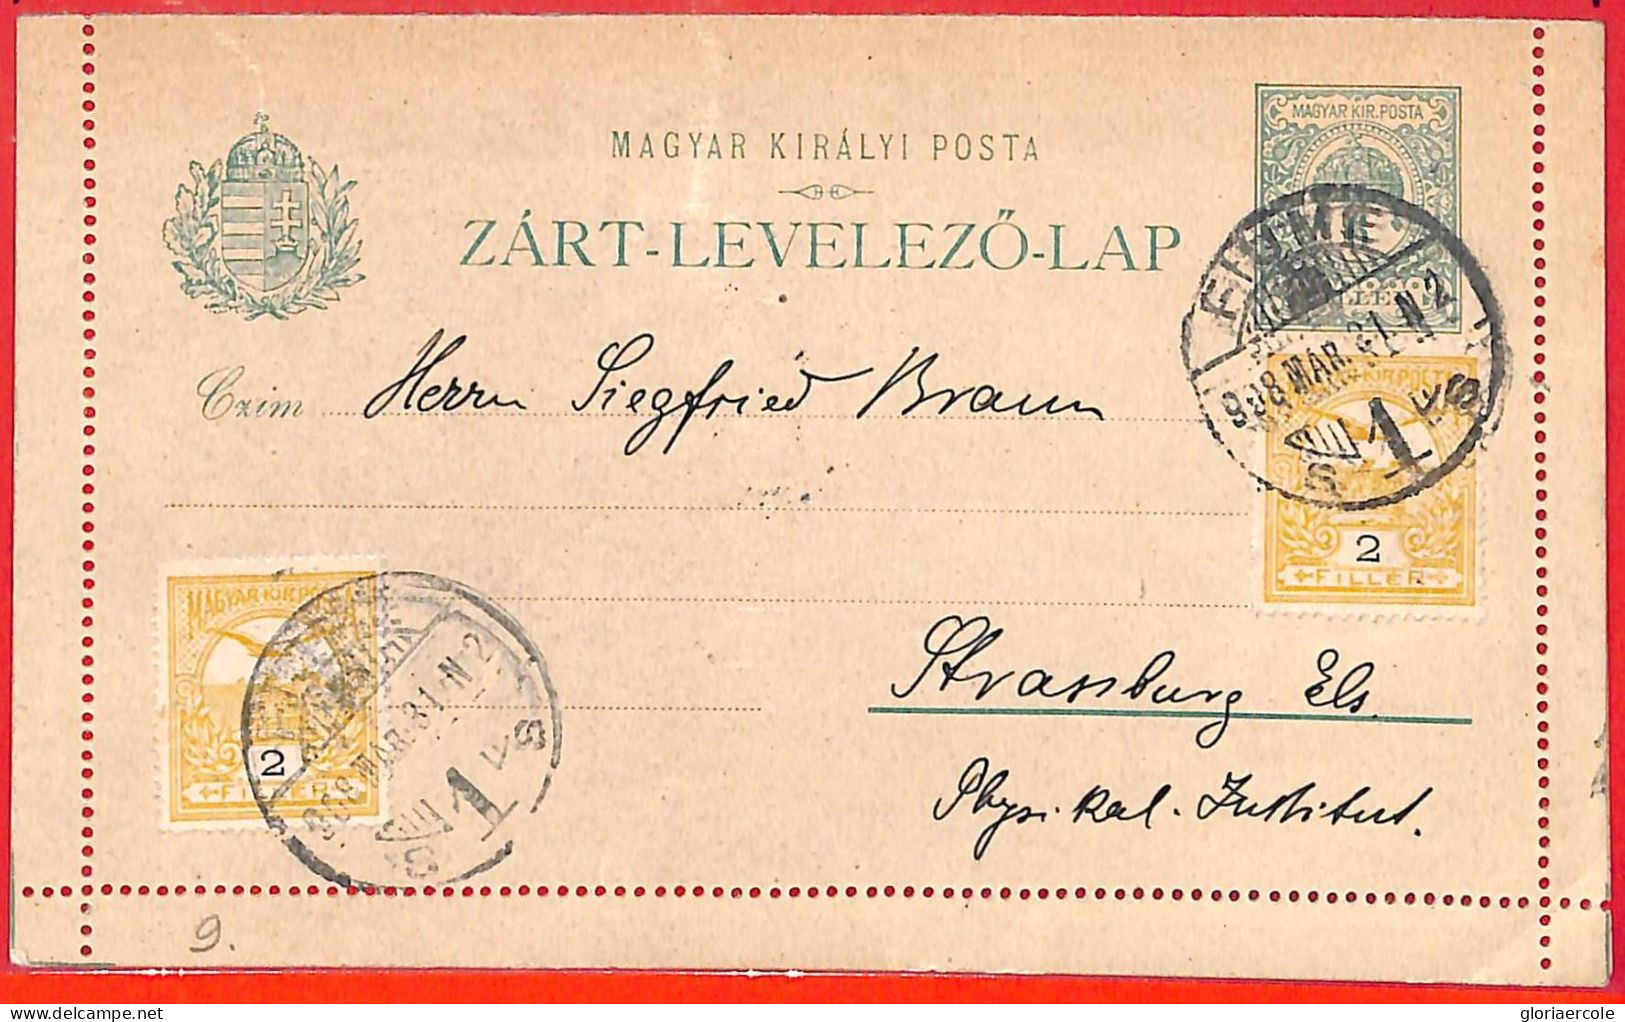 Aa1975 - HUNGARY - Postal History -  POSTAL STATIONERY Letter CARD 1898 - Officials